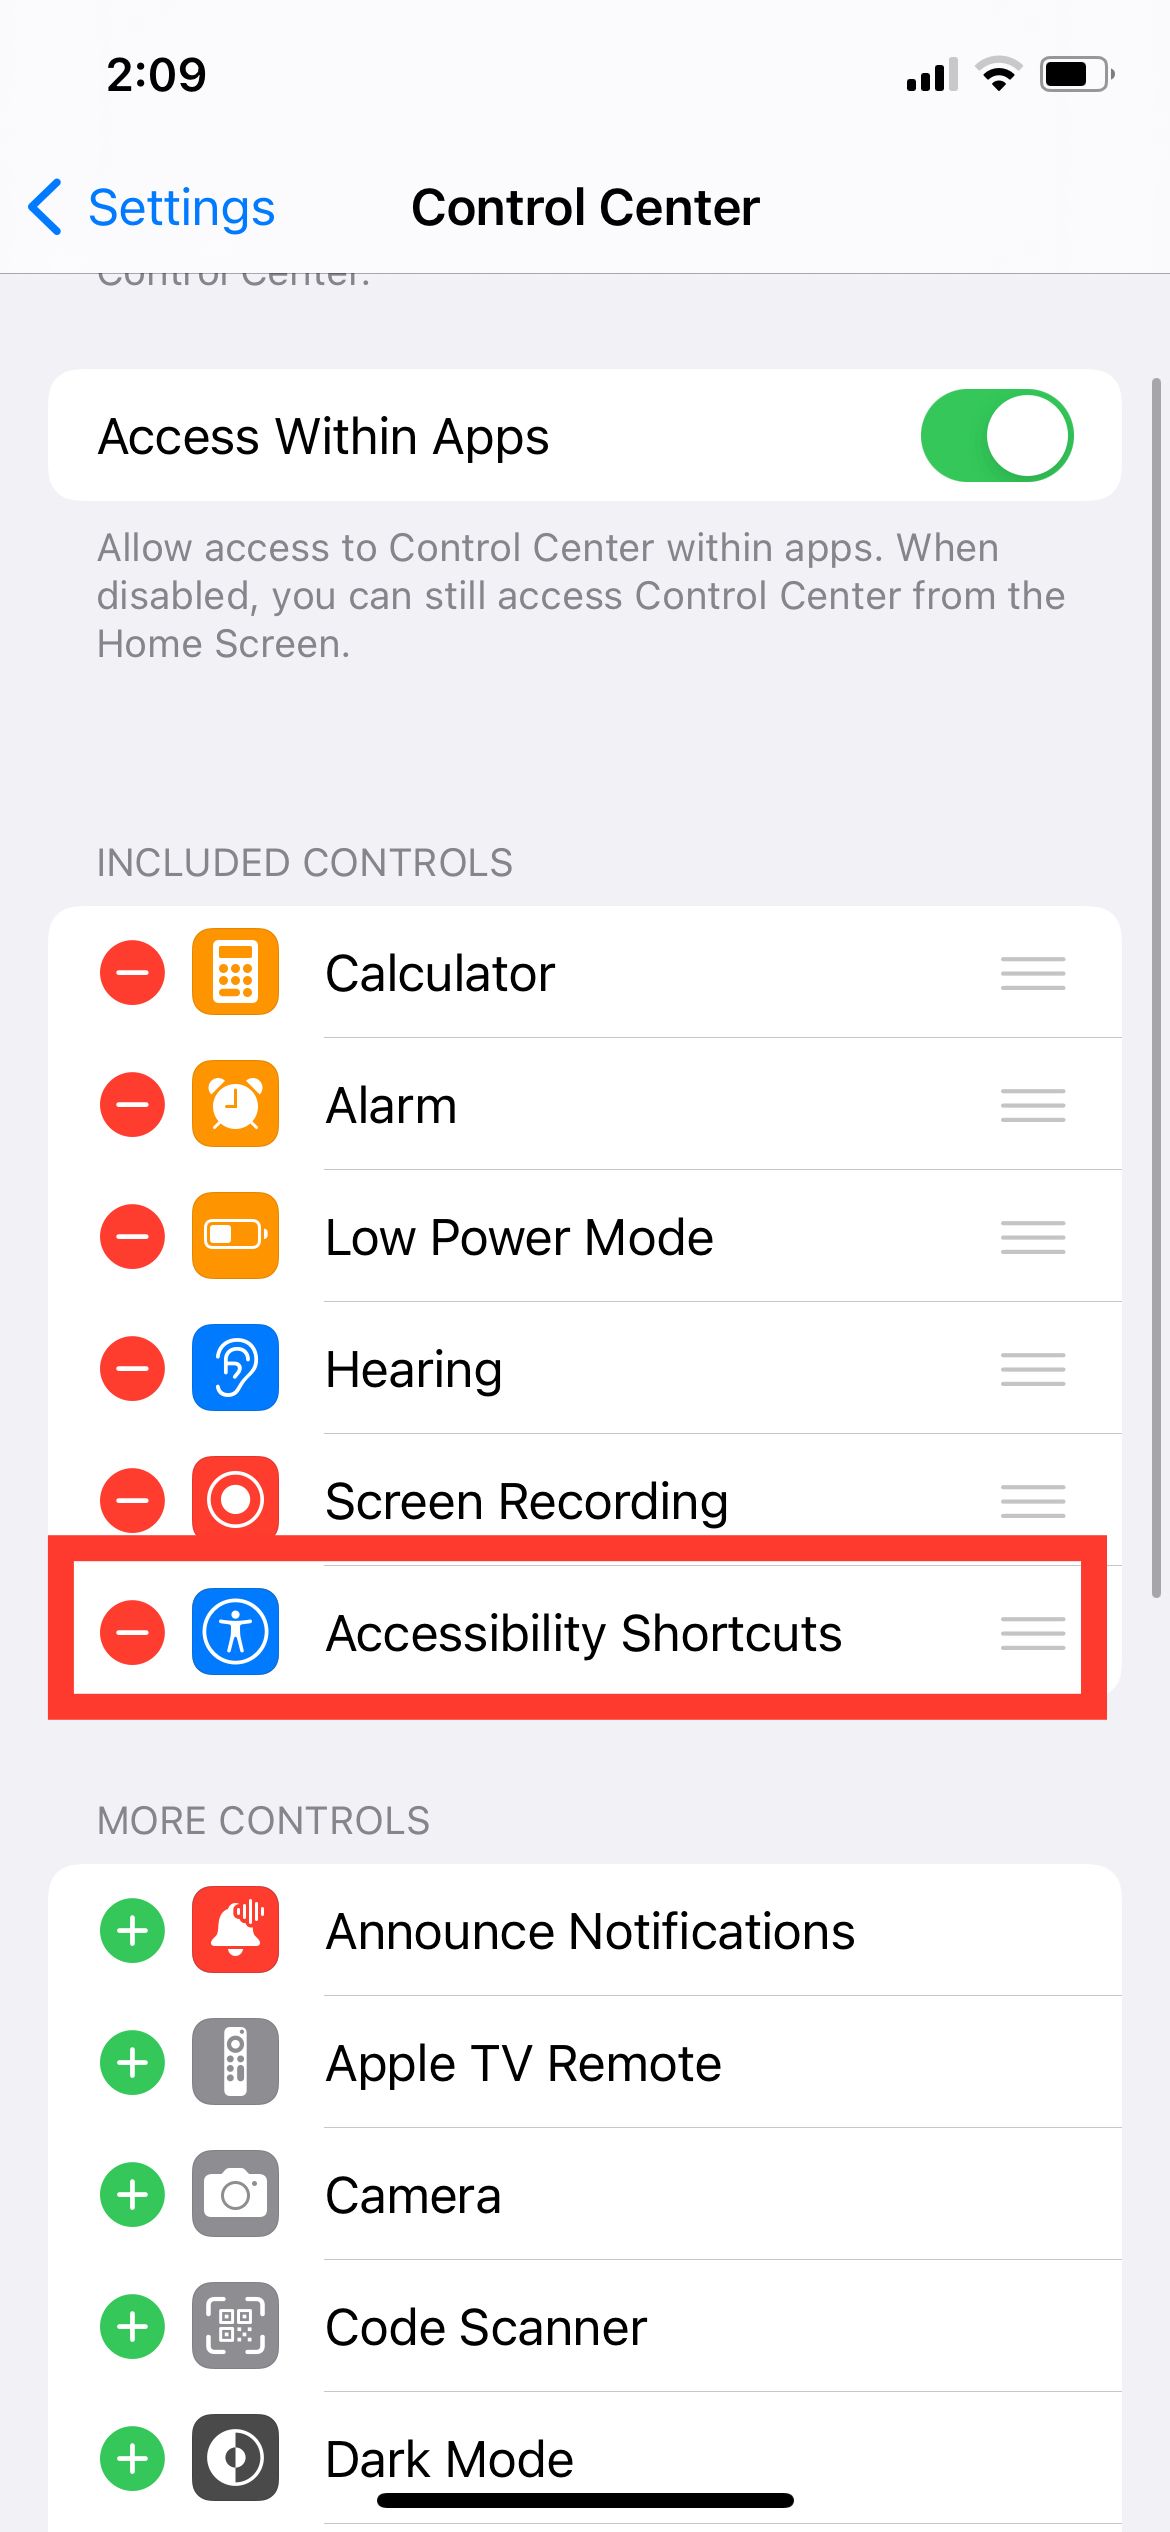 Accessibility shortcuts on Control Center